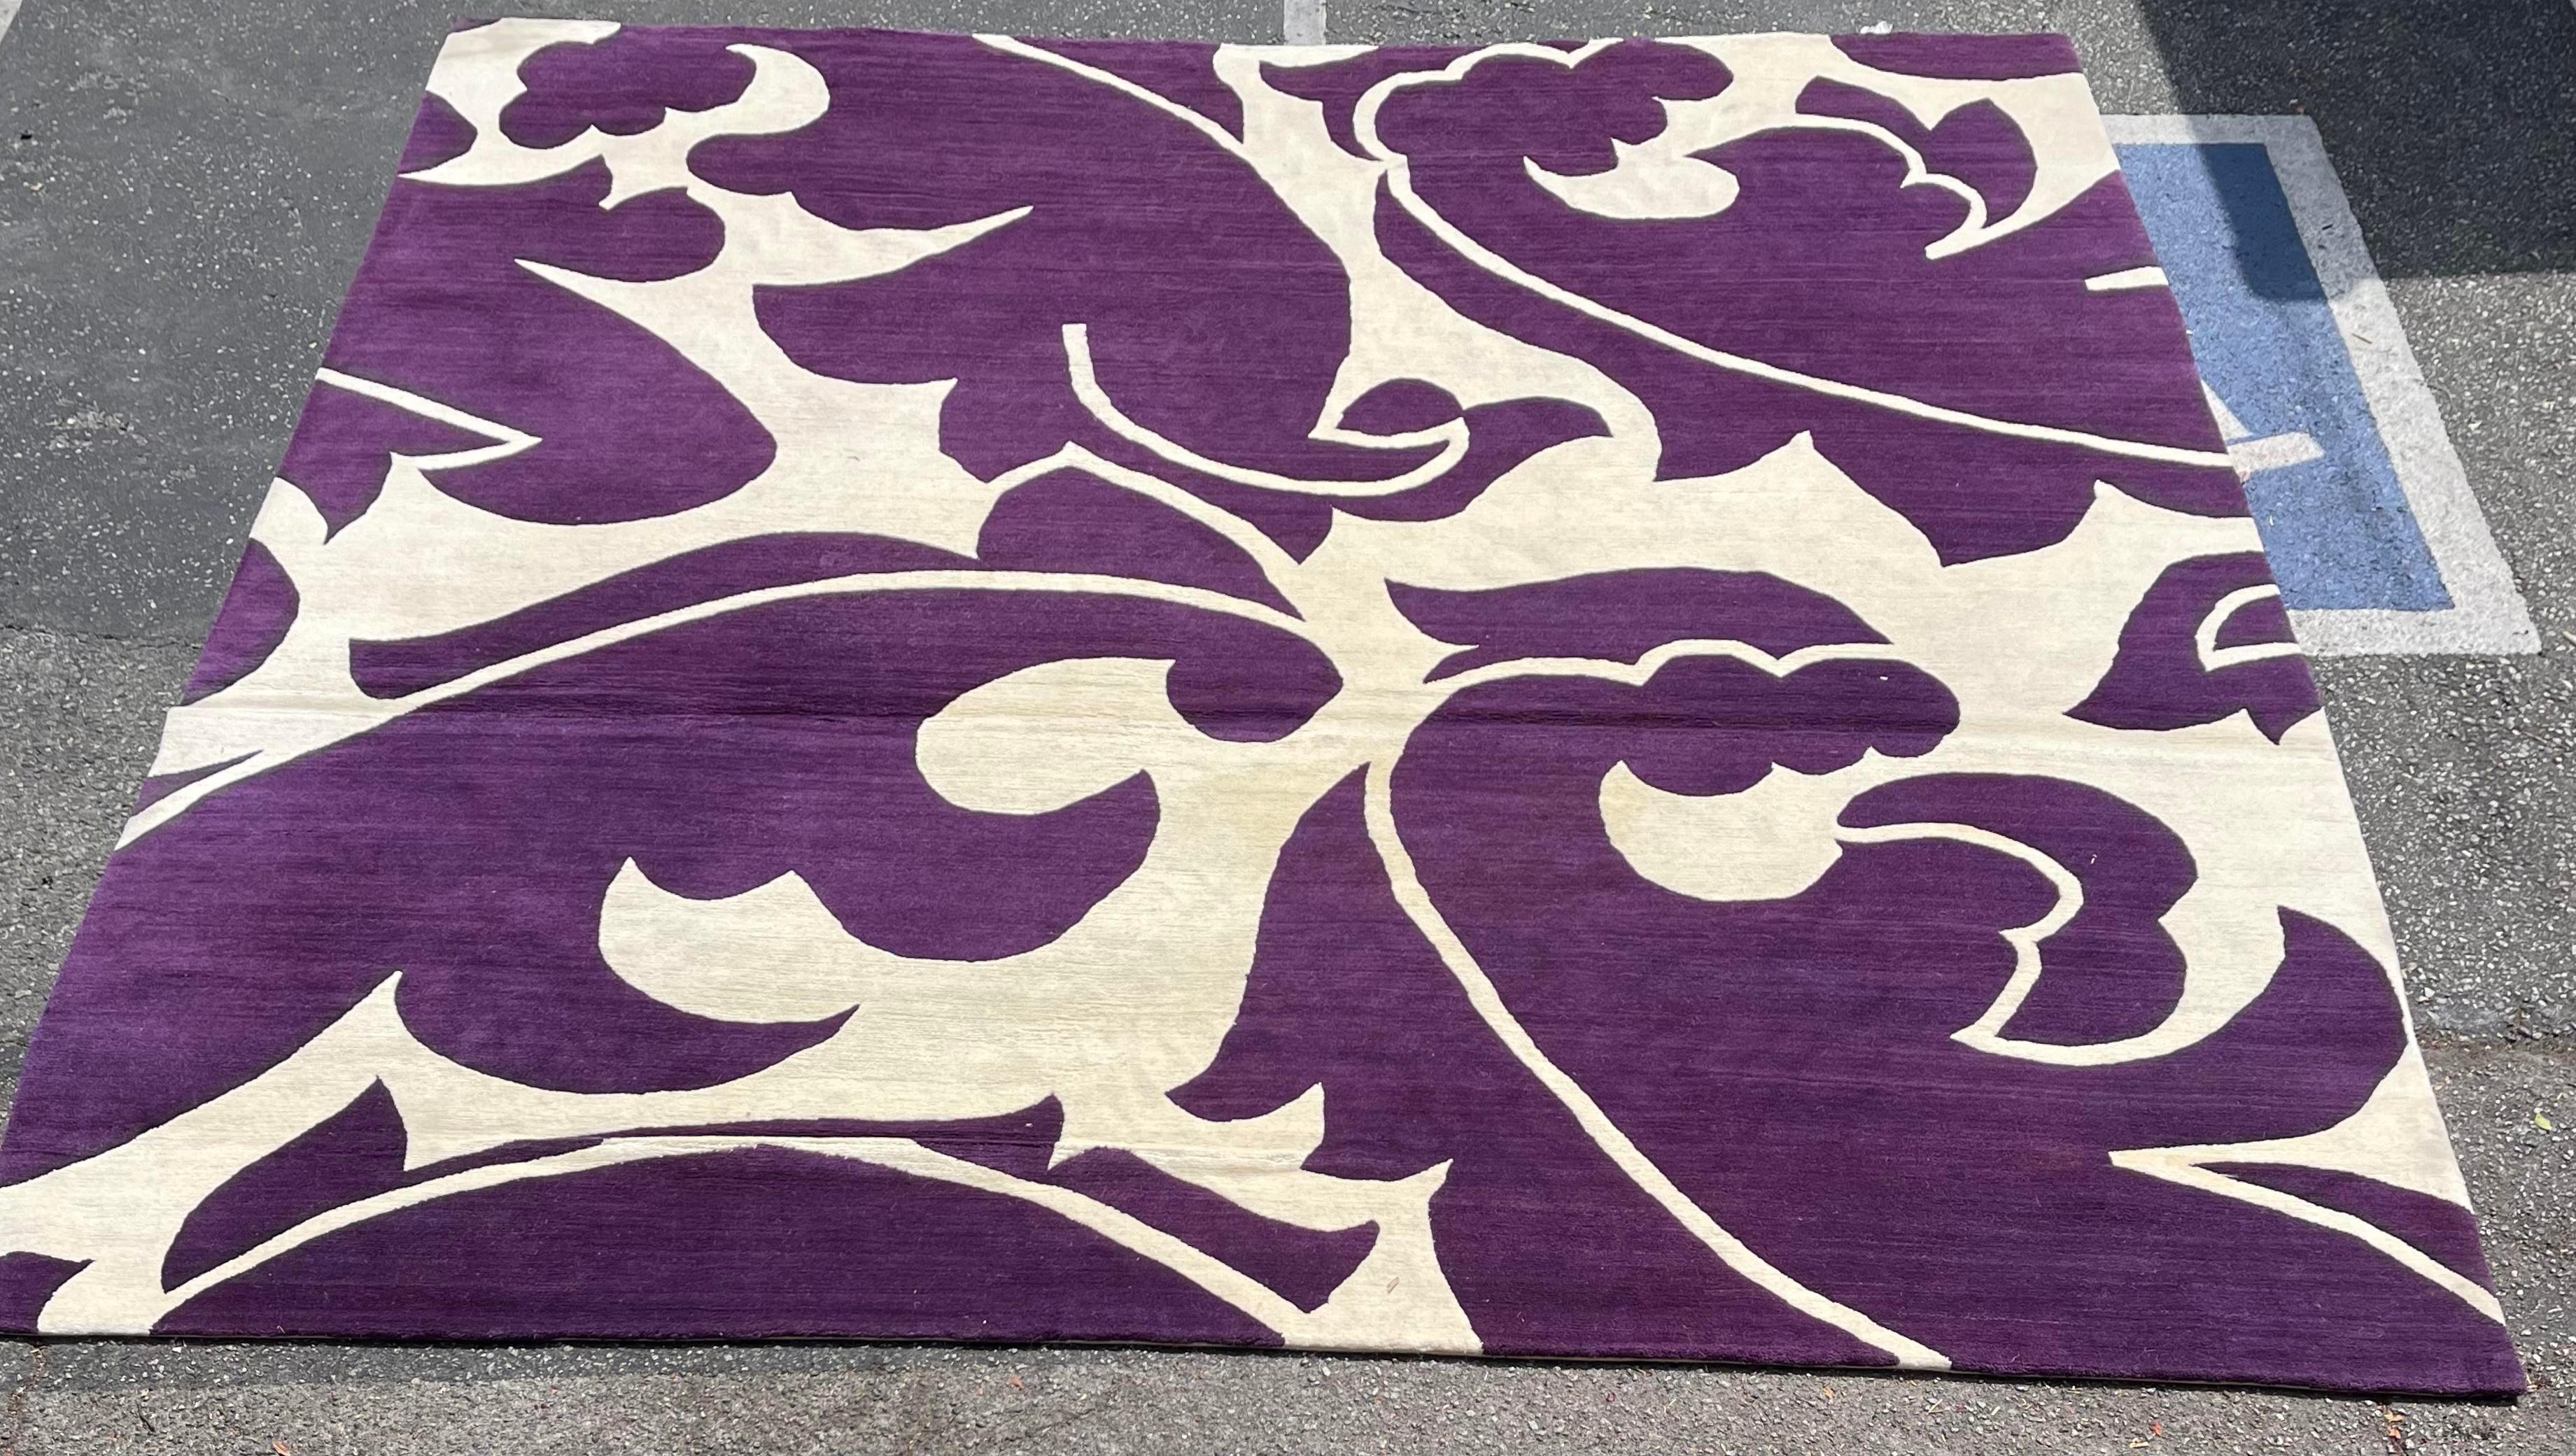 10' by 10' modern purple & white carpet by Marni for the Rug Company.